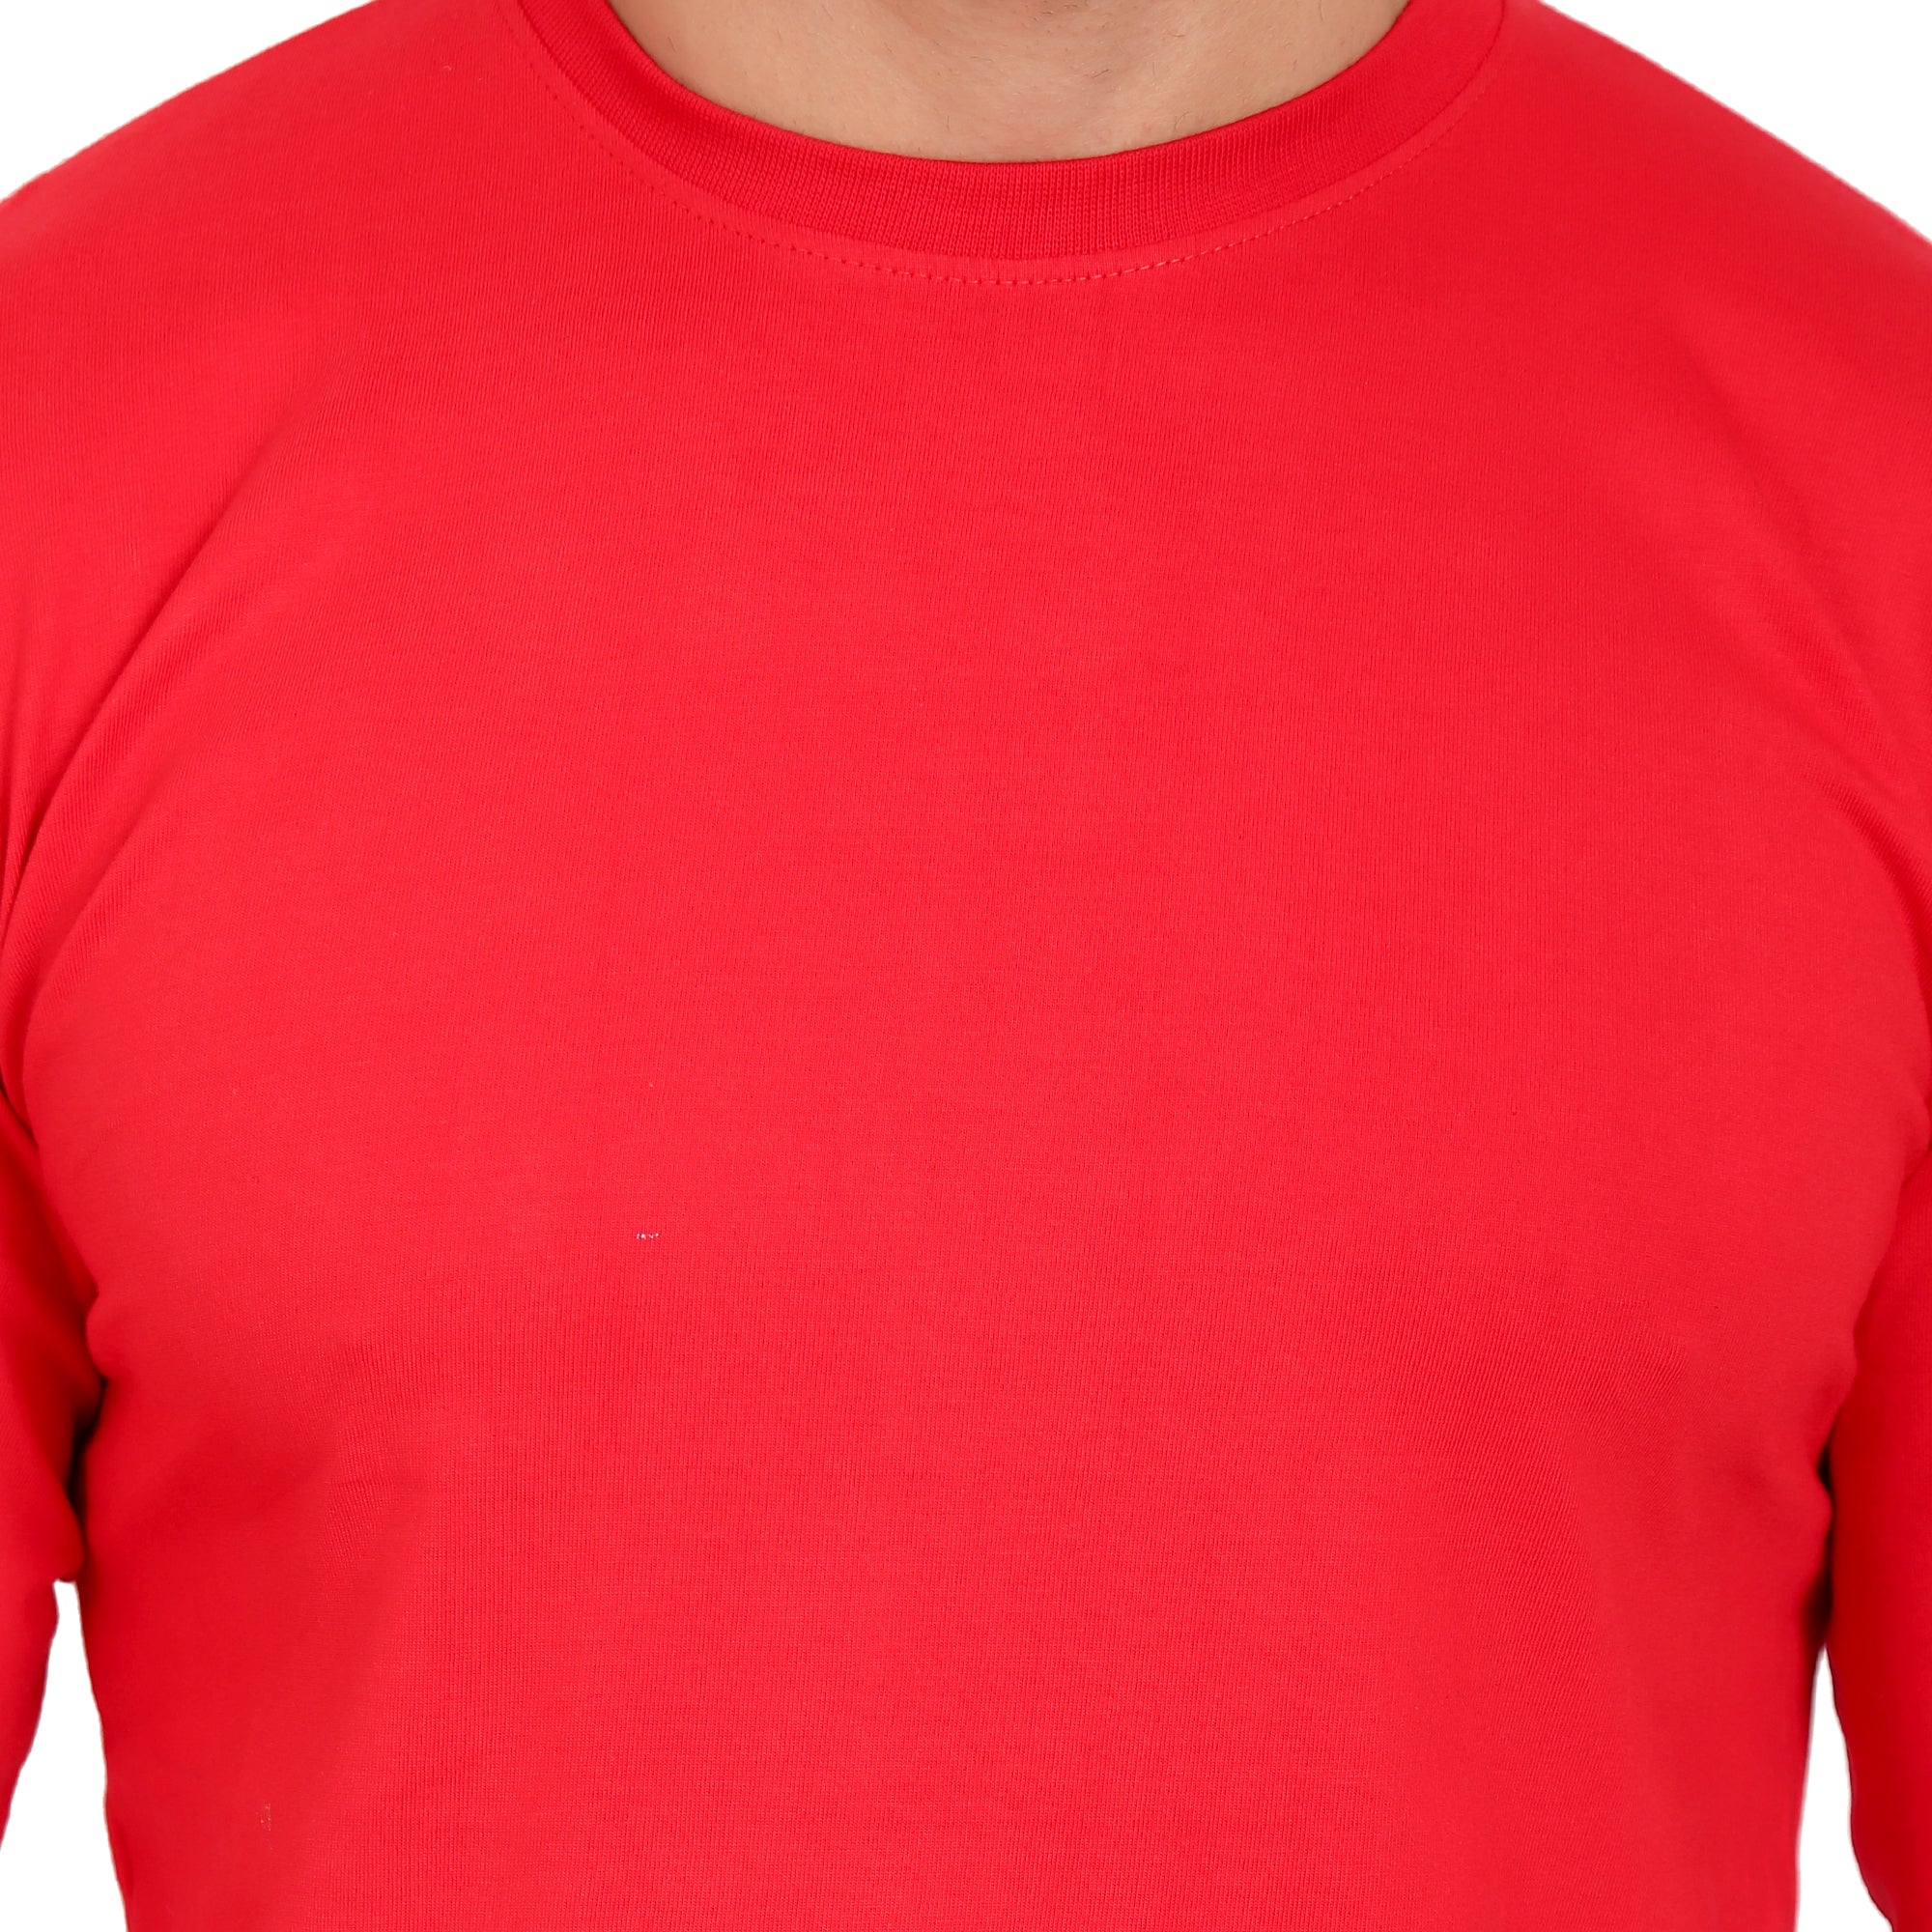 Men Crew Neck Cotton T-Shirts - Full Sleeves, Red Colour